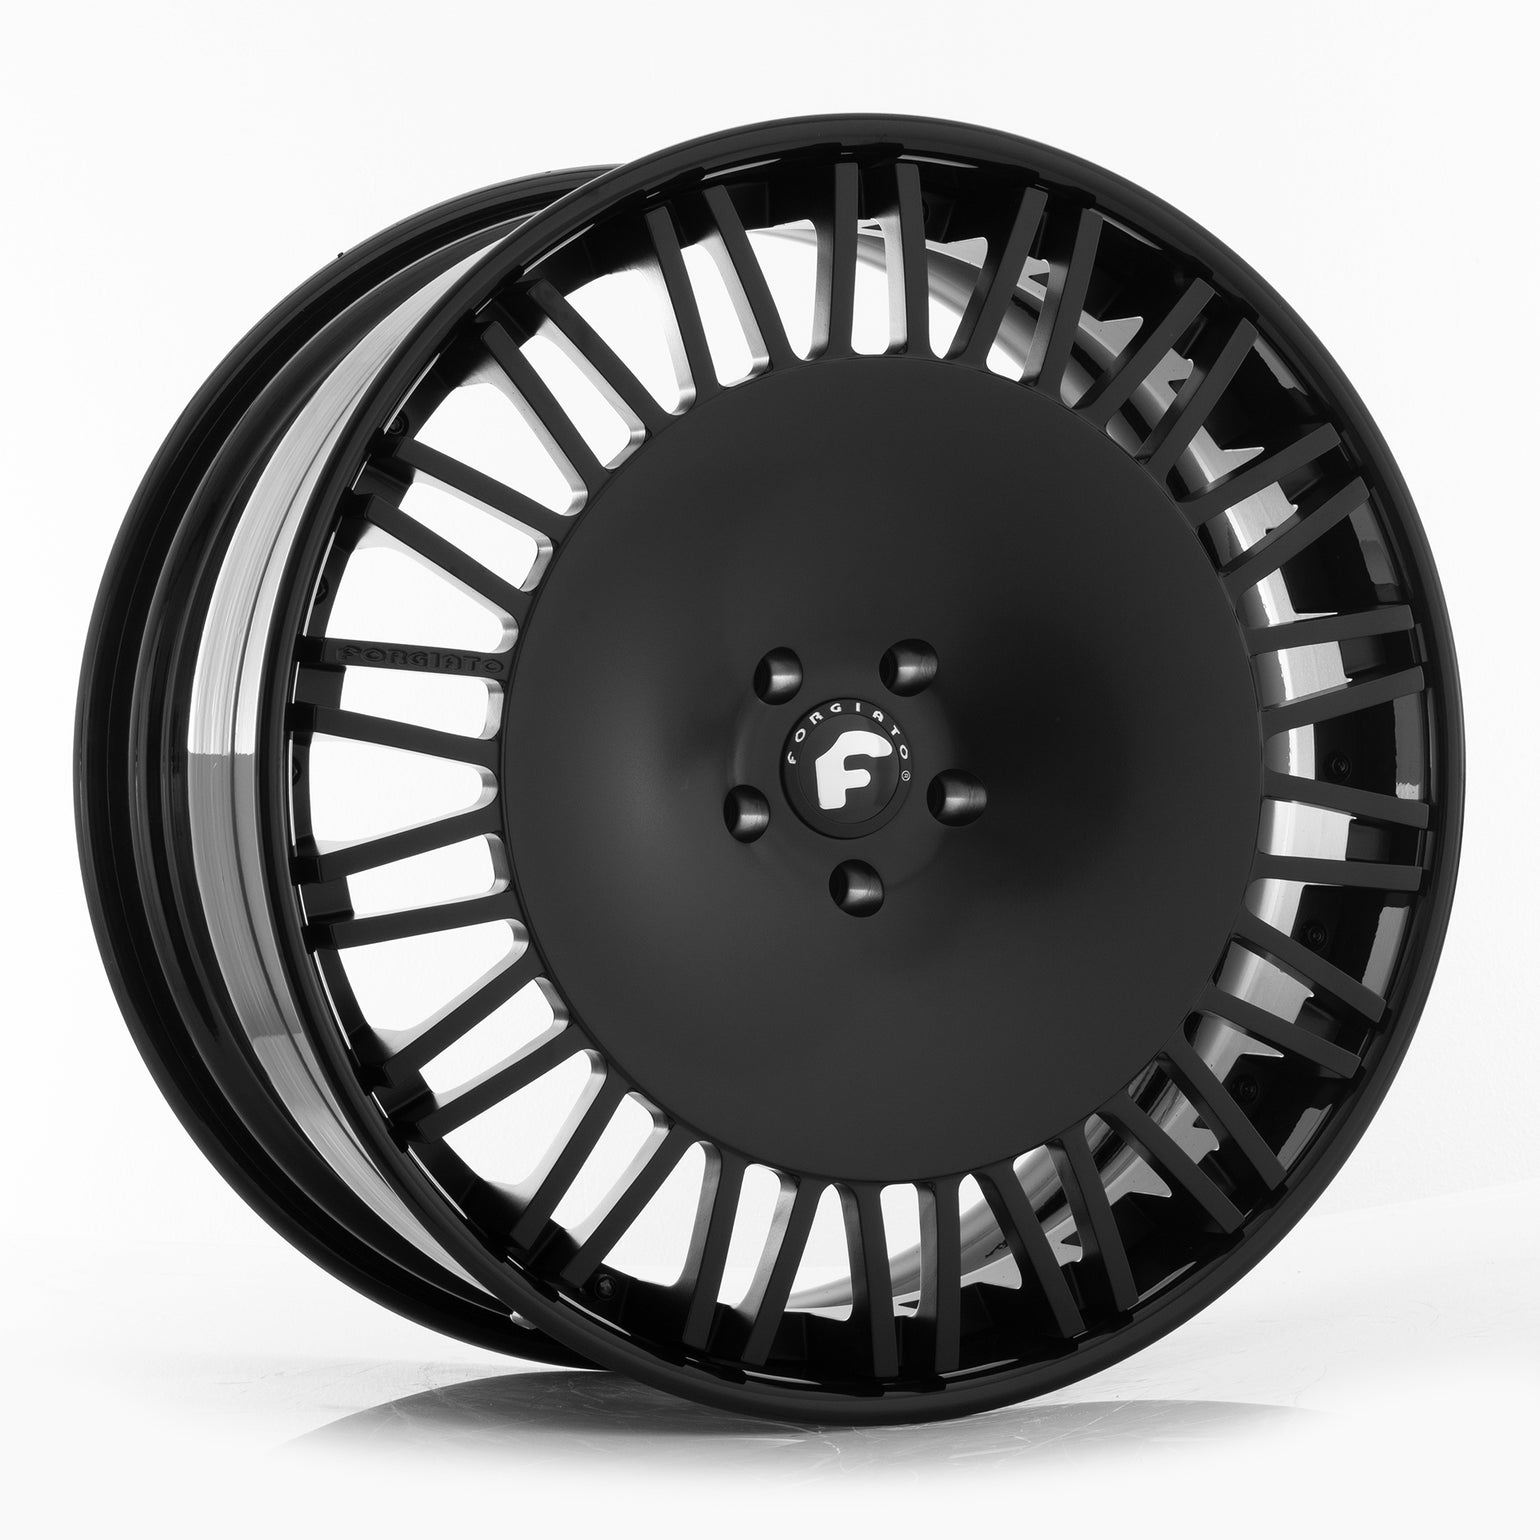 24" Set of 4 Forgiato Luce-ECL for Range Rover HSE or Sport (ECL Forging) - Wheels | Rims